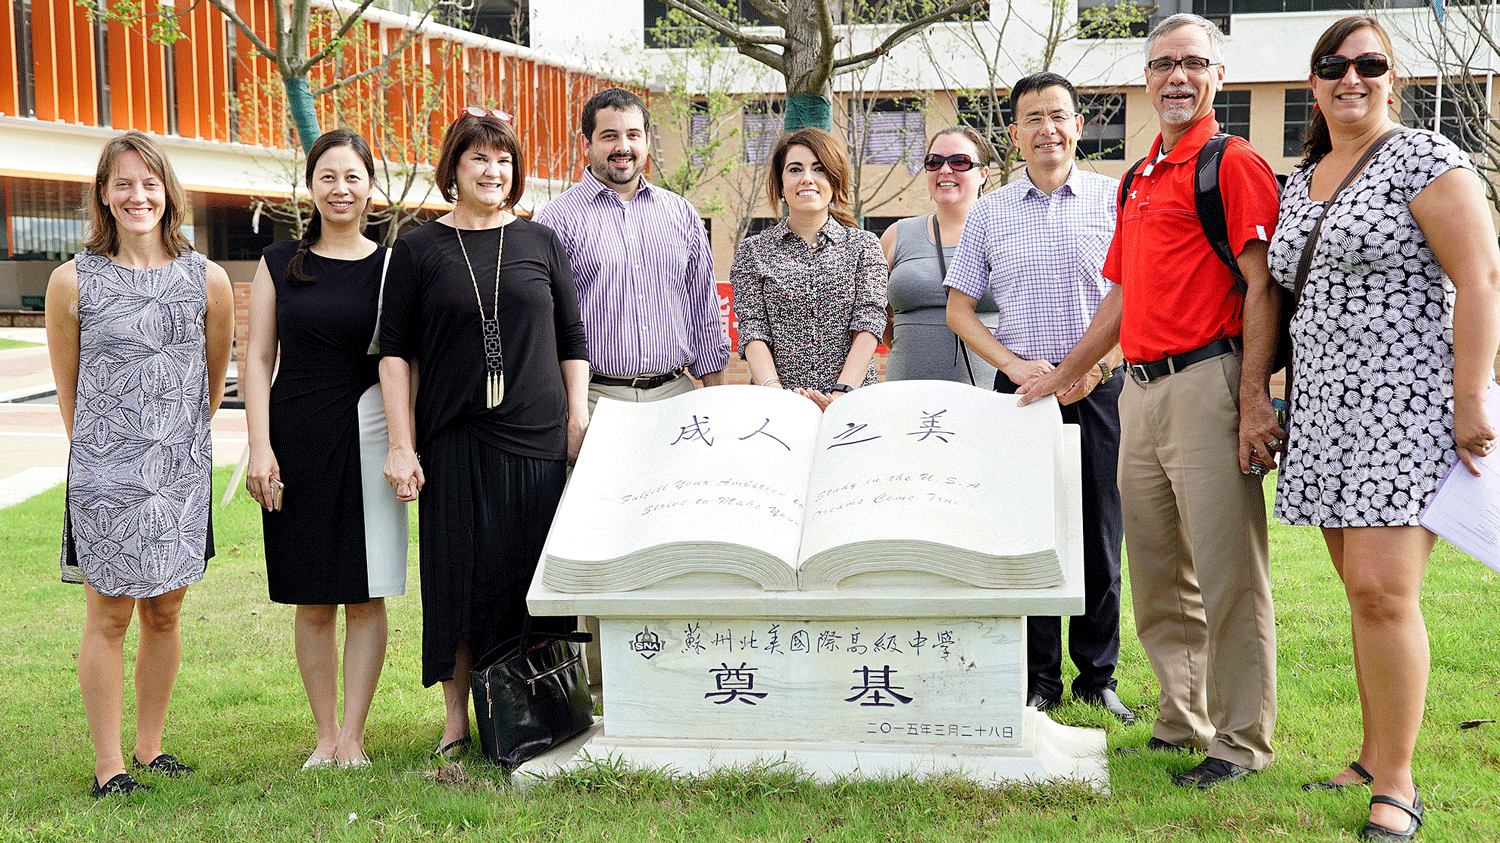 Hiller Spires and delegation at the Suzhou North America High School.